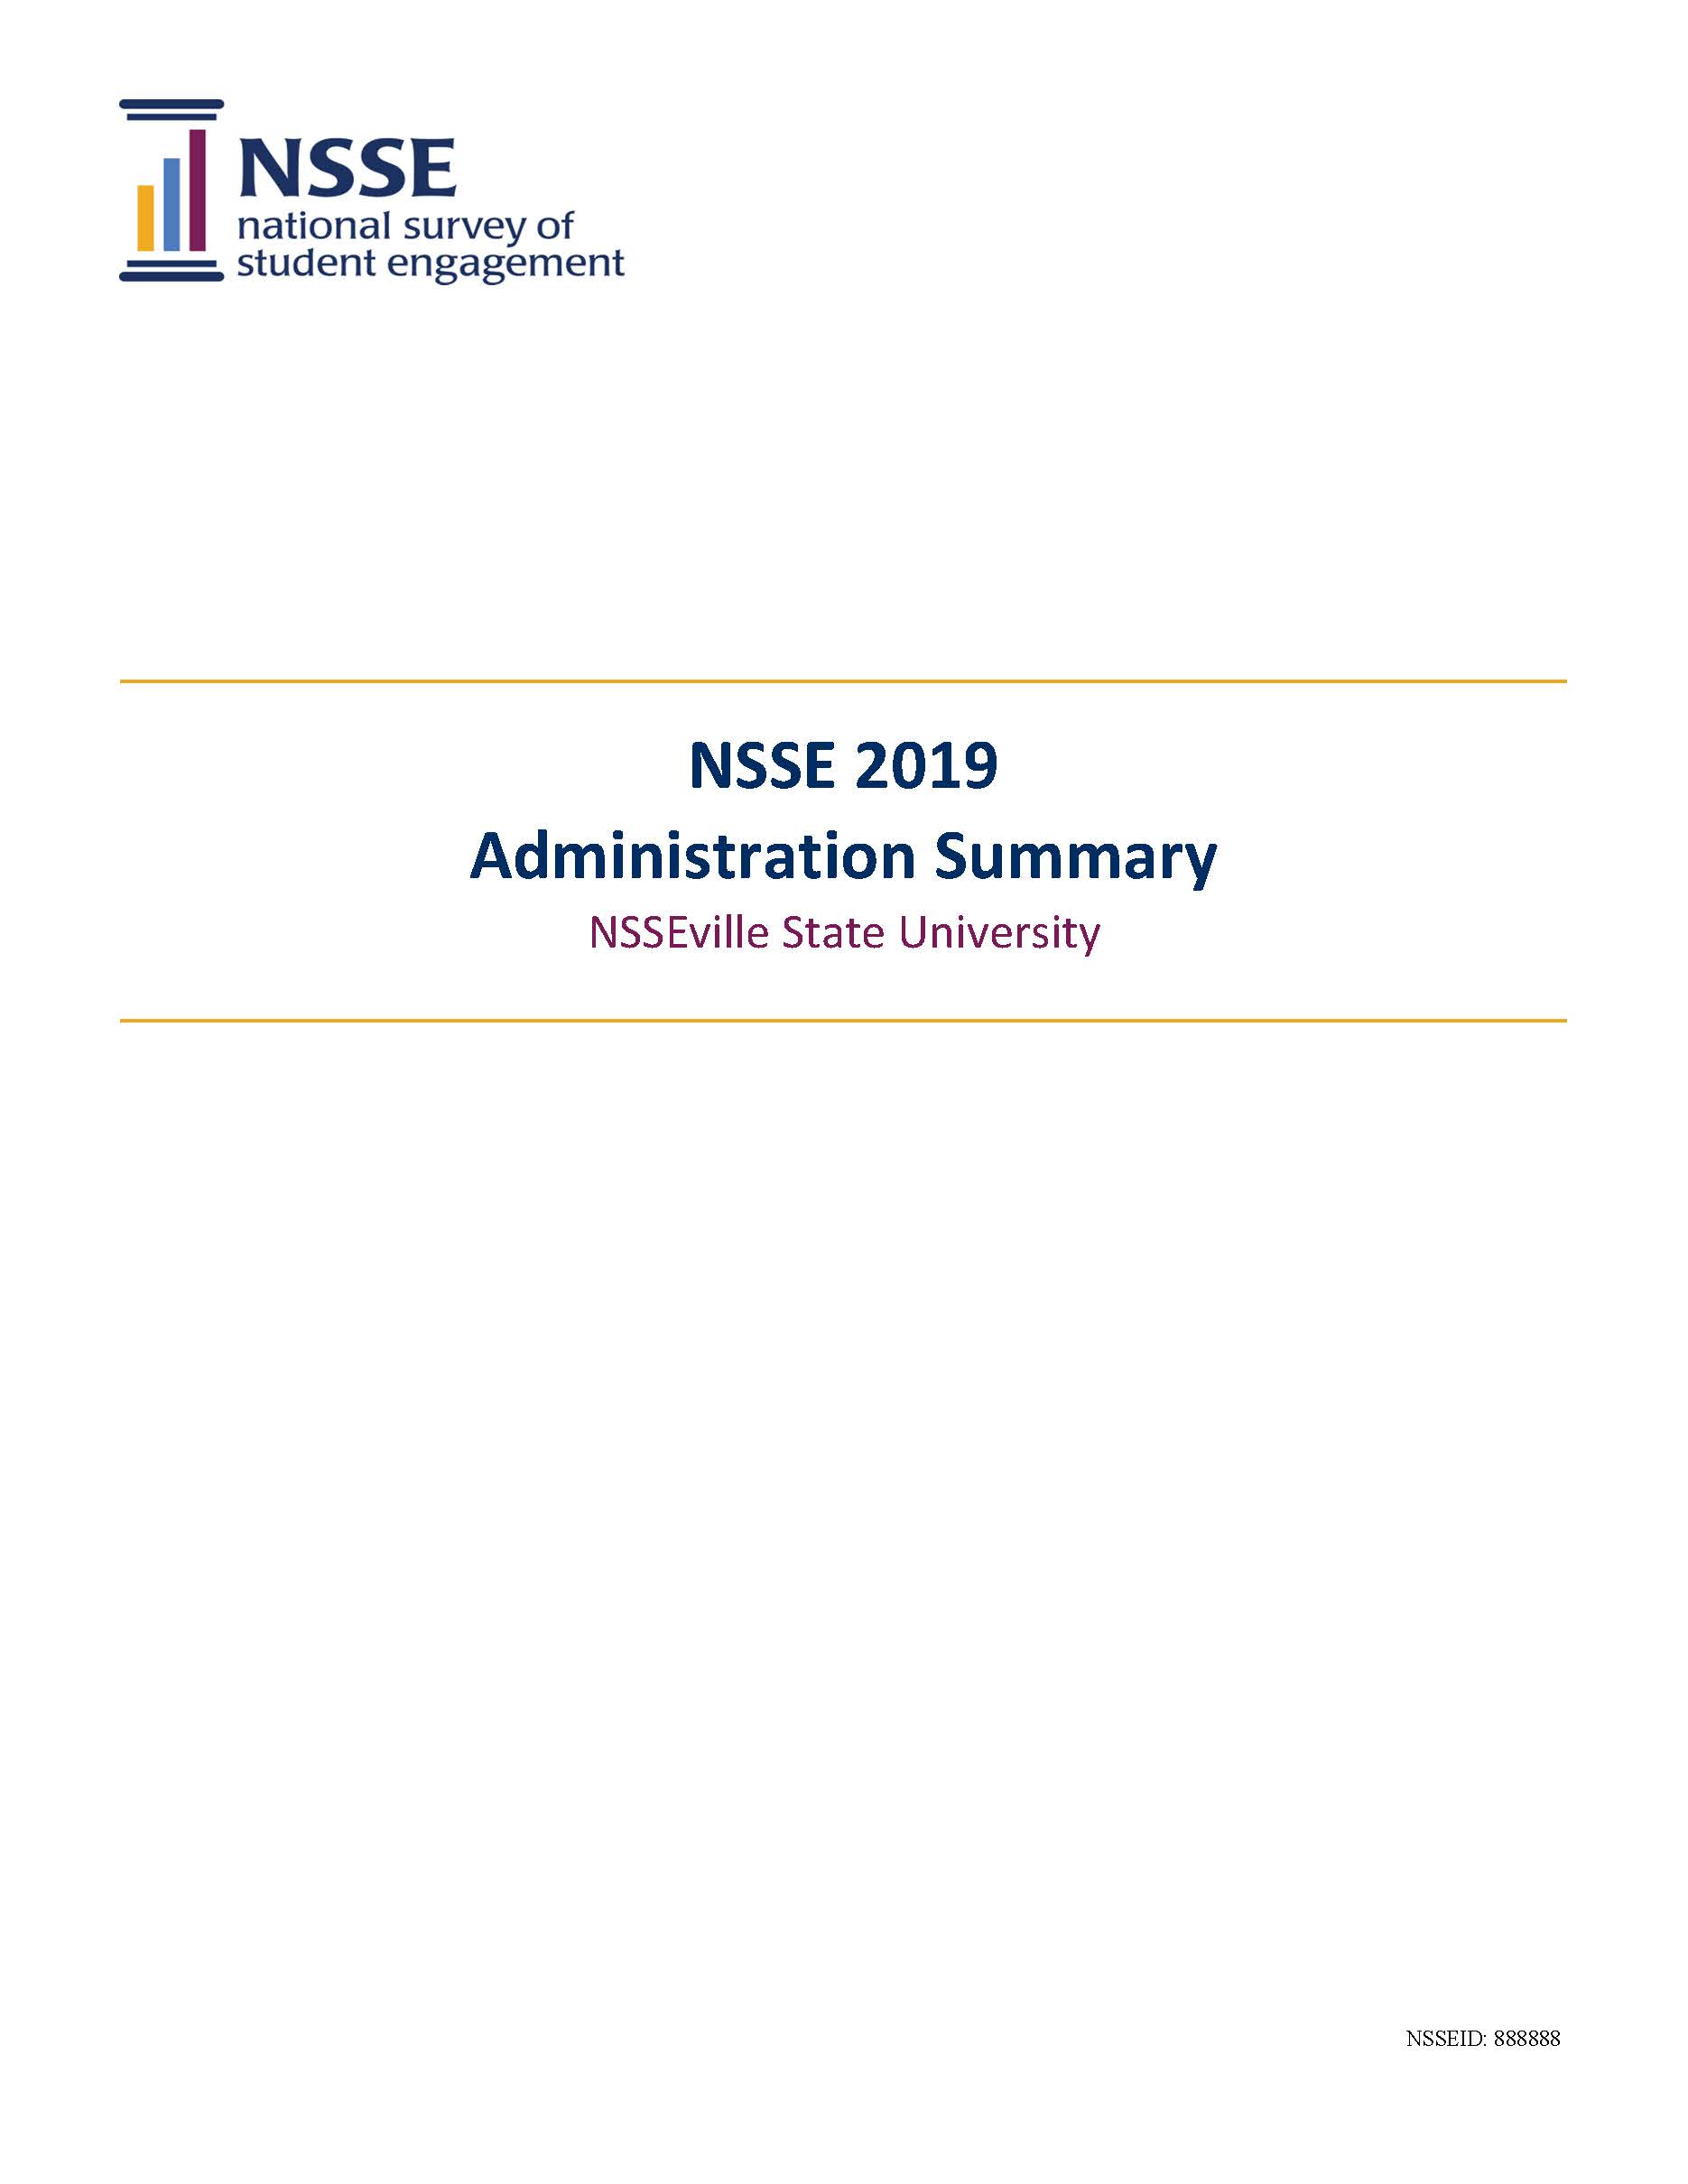 Sample Report: page 1 of NSSE Administration Summary